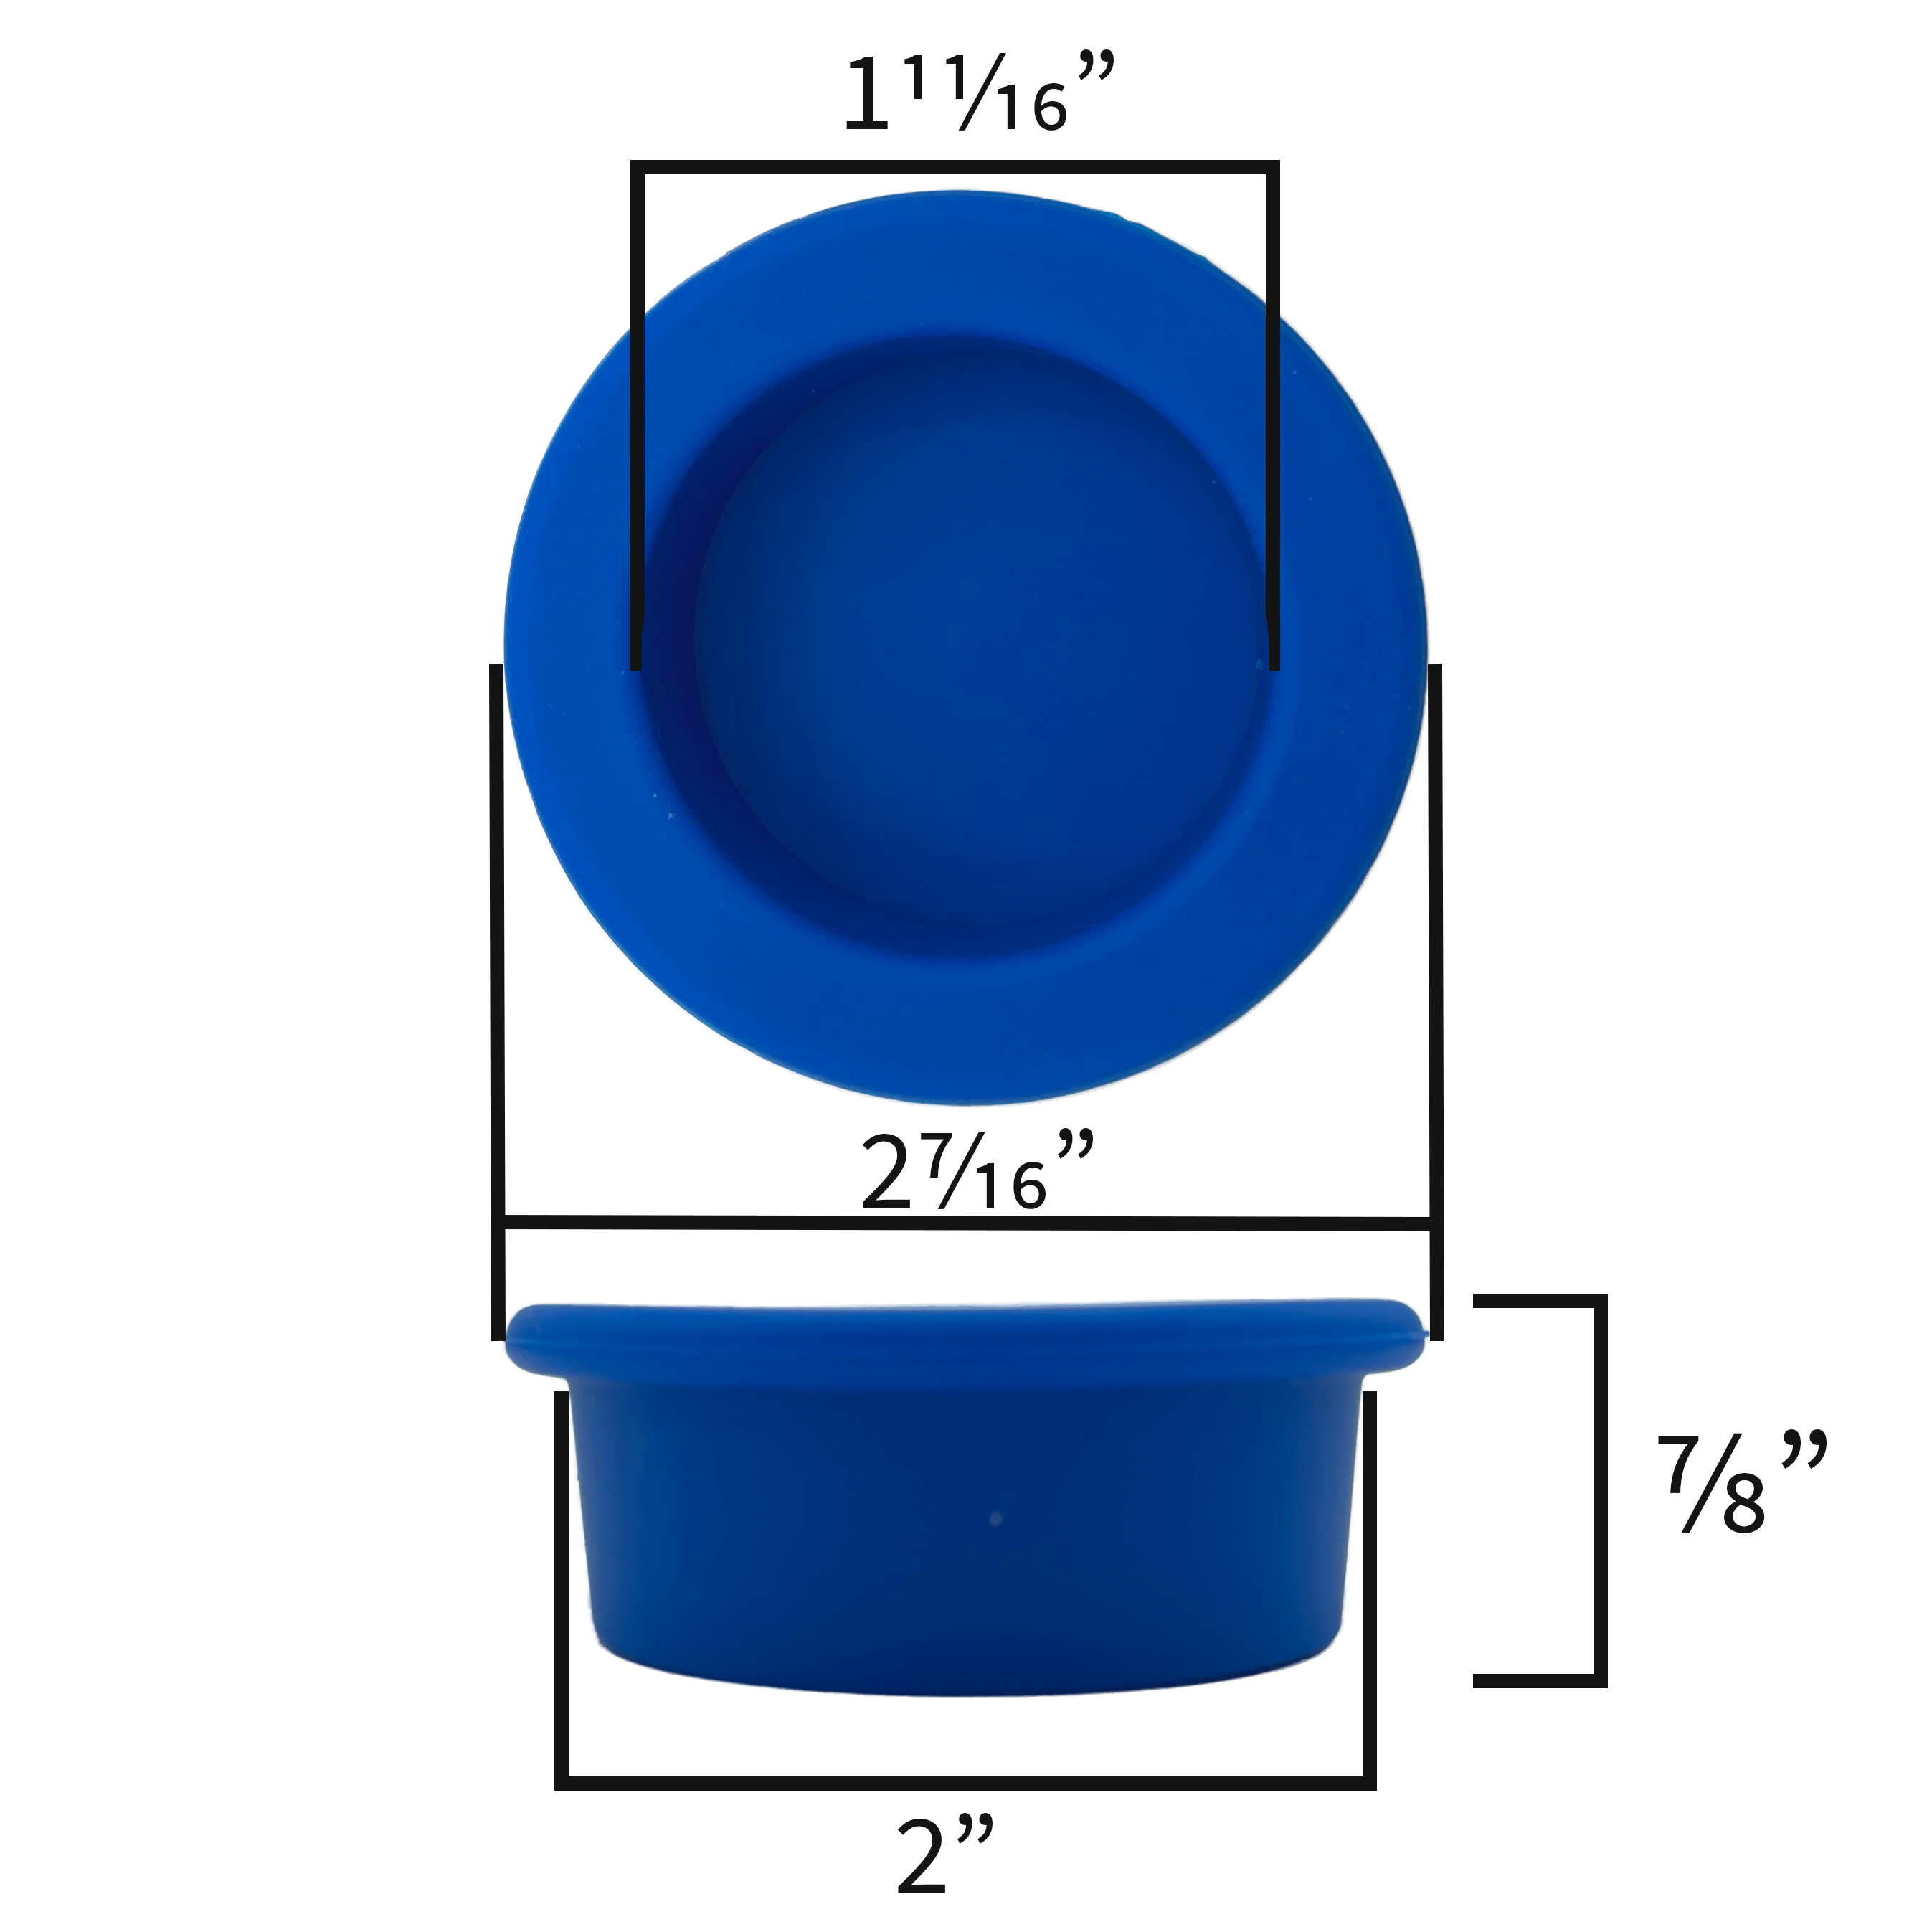 What are the benefits of silicone cup lids?